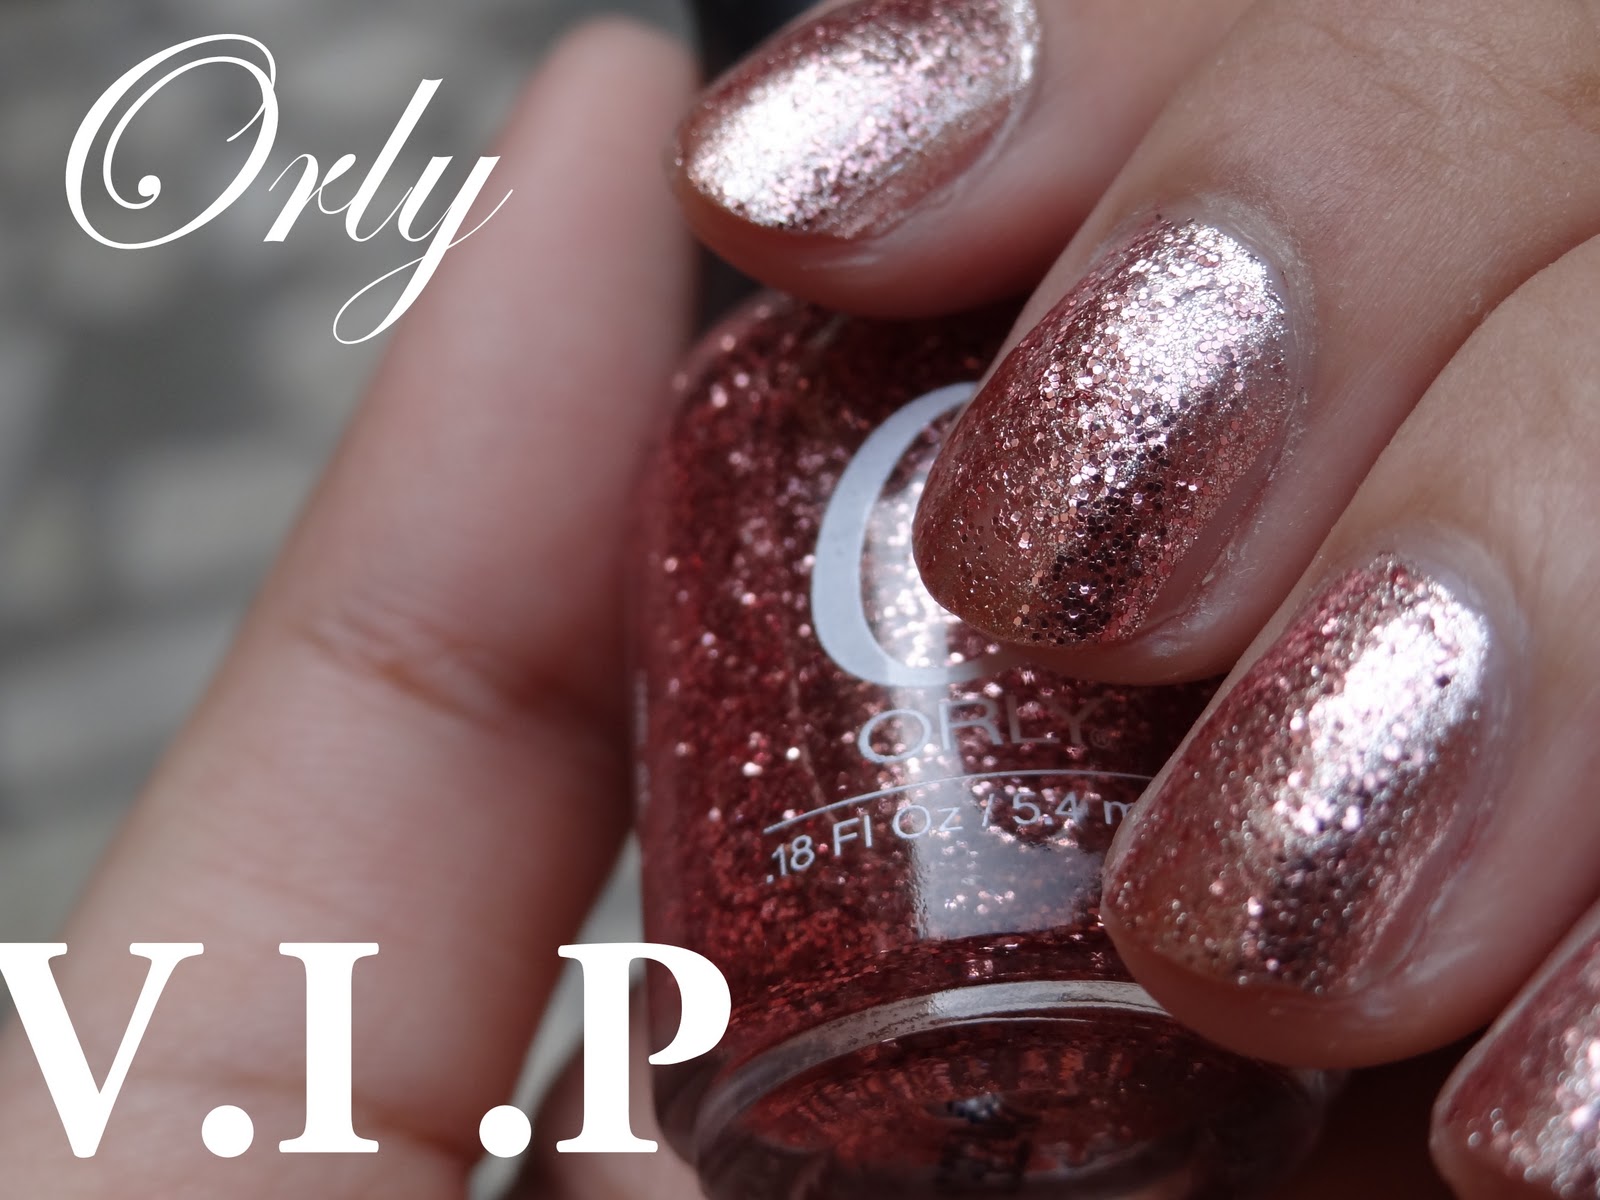 Orly VIP layered over Orly Rage